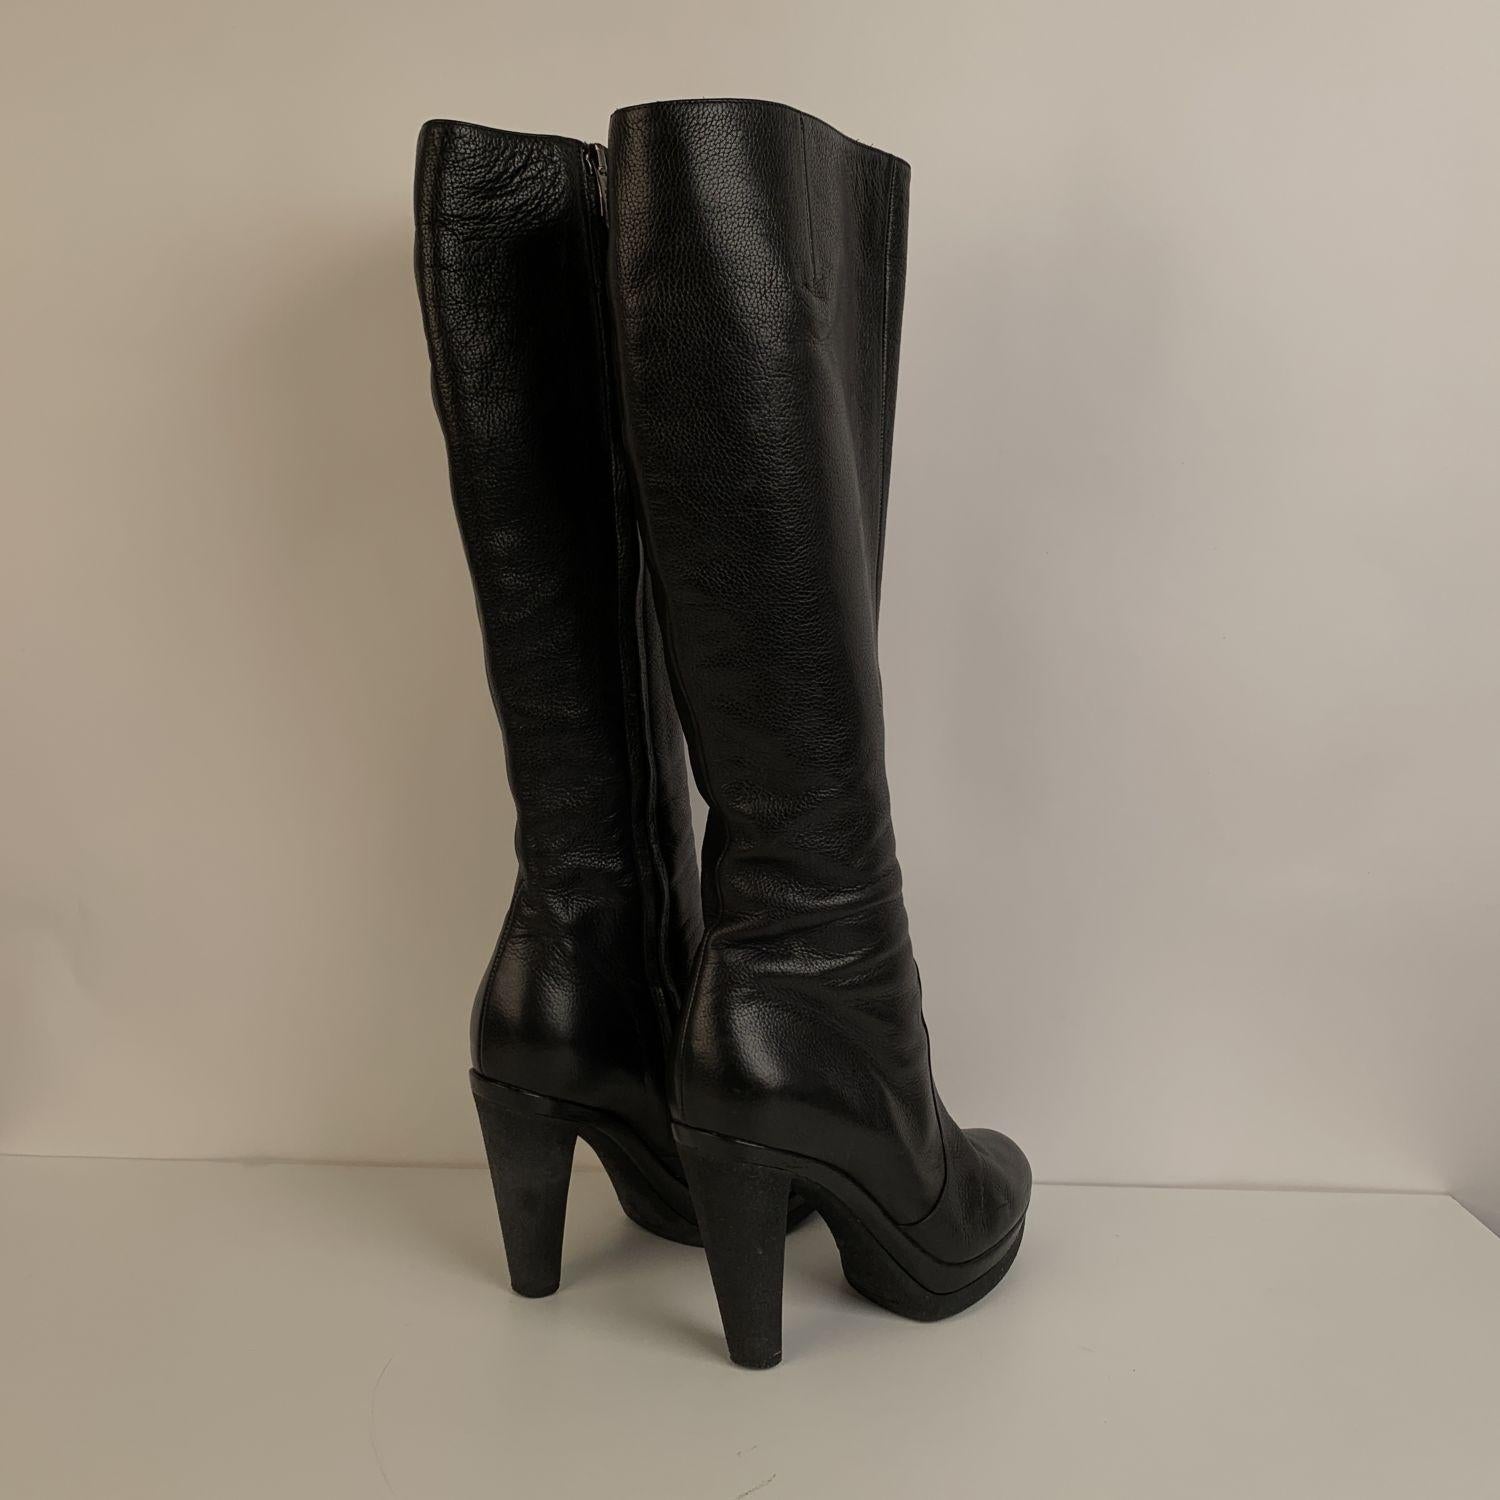 Sergio Rossi Black Leather Heeled Boots. Long side zip closure. Rubber outsoles and heels. Shaft height: 15 inches - 38,1 cm (from heel to top). Size:38.5 (The size shown for this item is the size indicated by the designer on the shoes). Patform